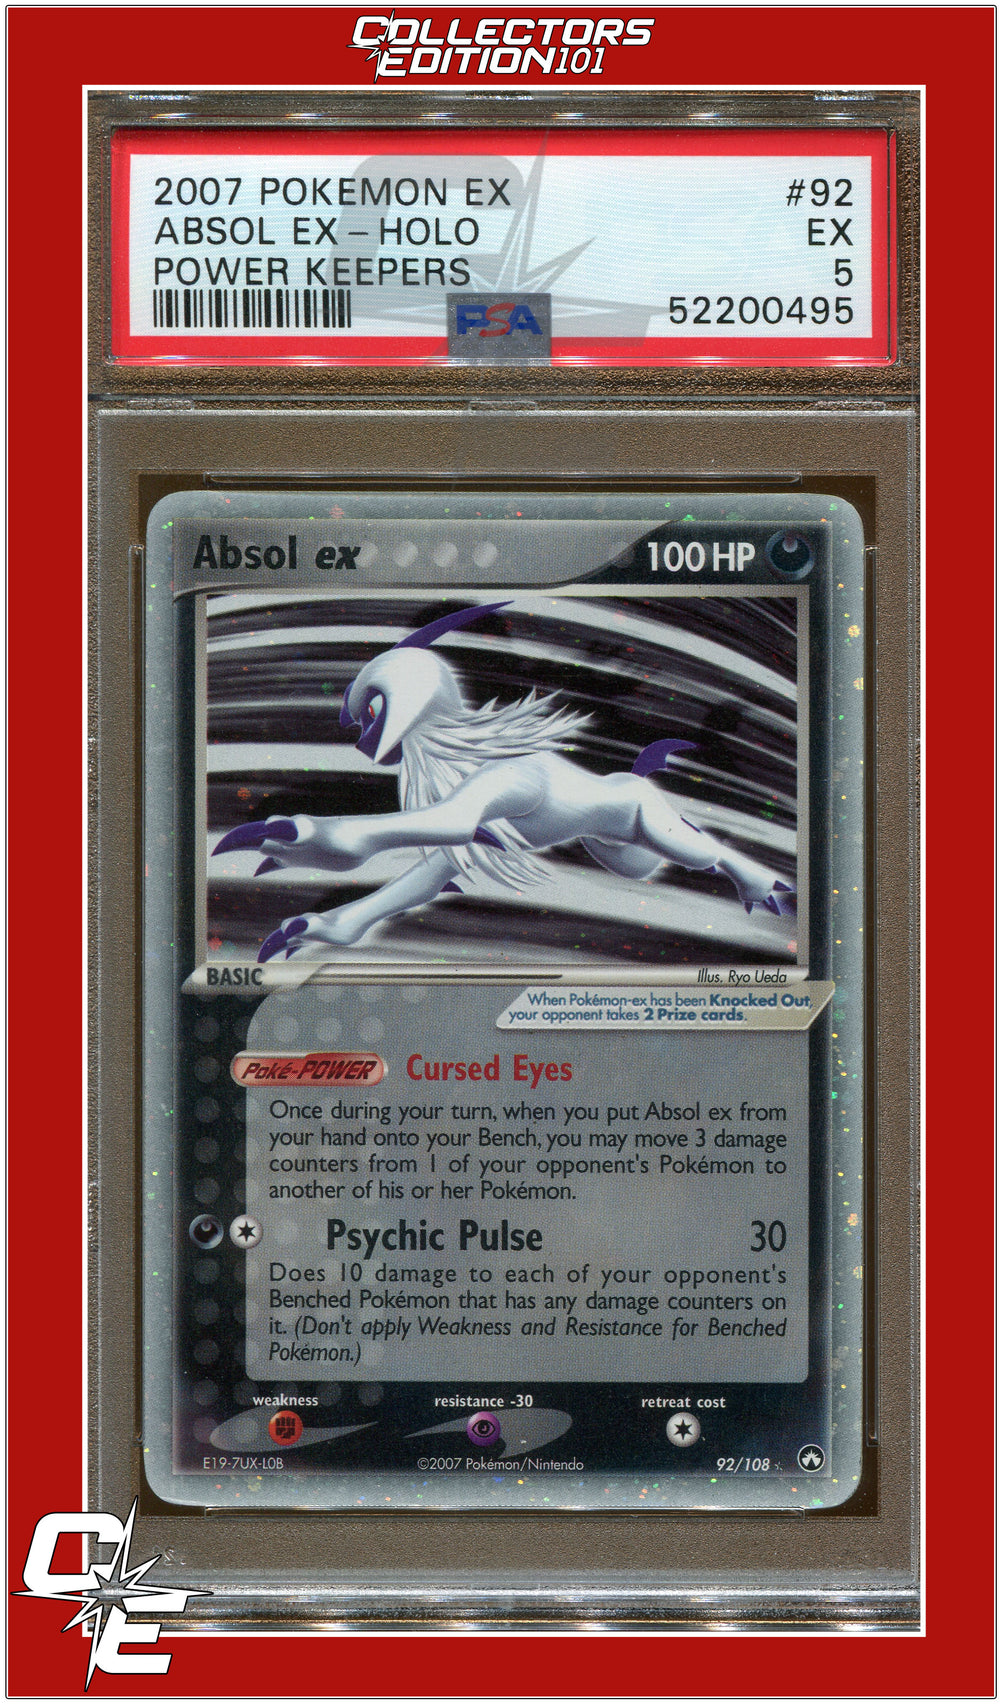 EX Power Keepers 92 Absol EX Holo PSA 5